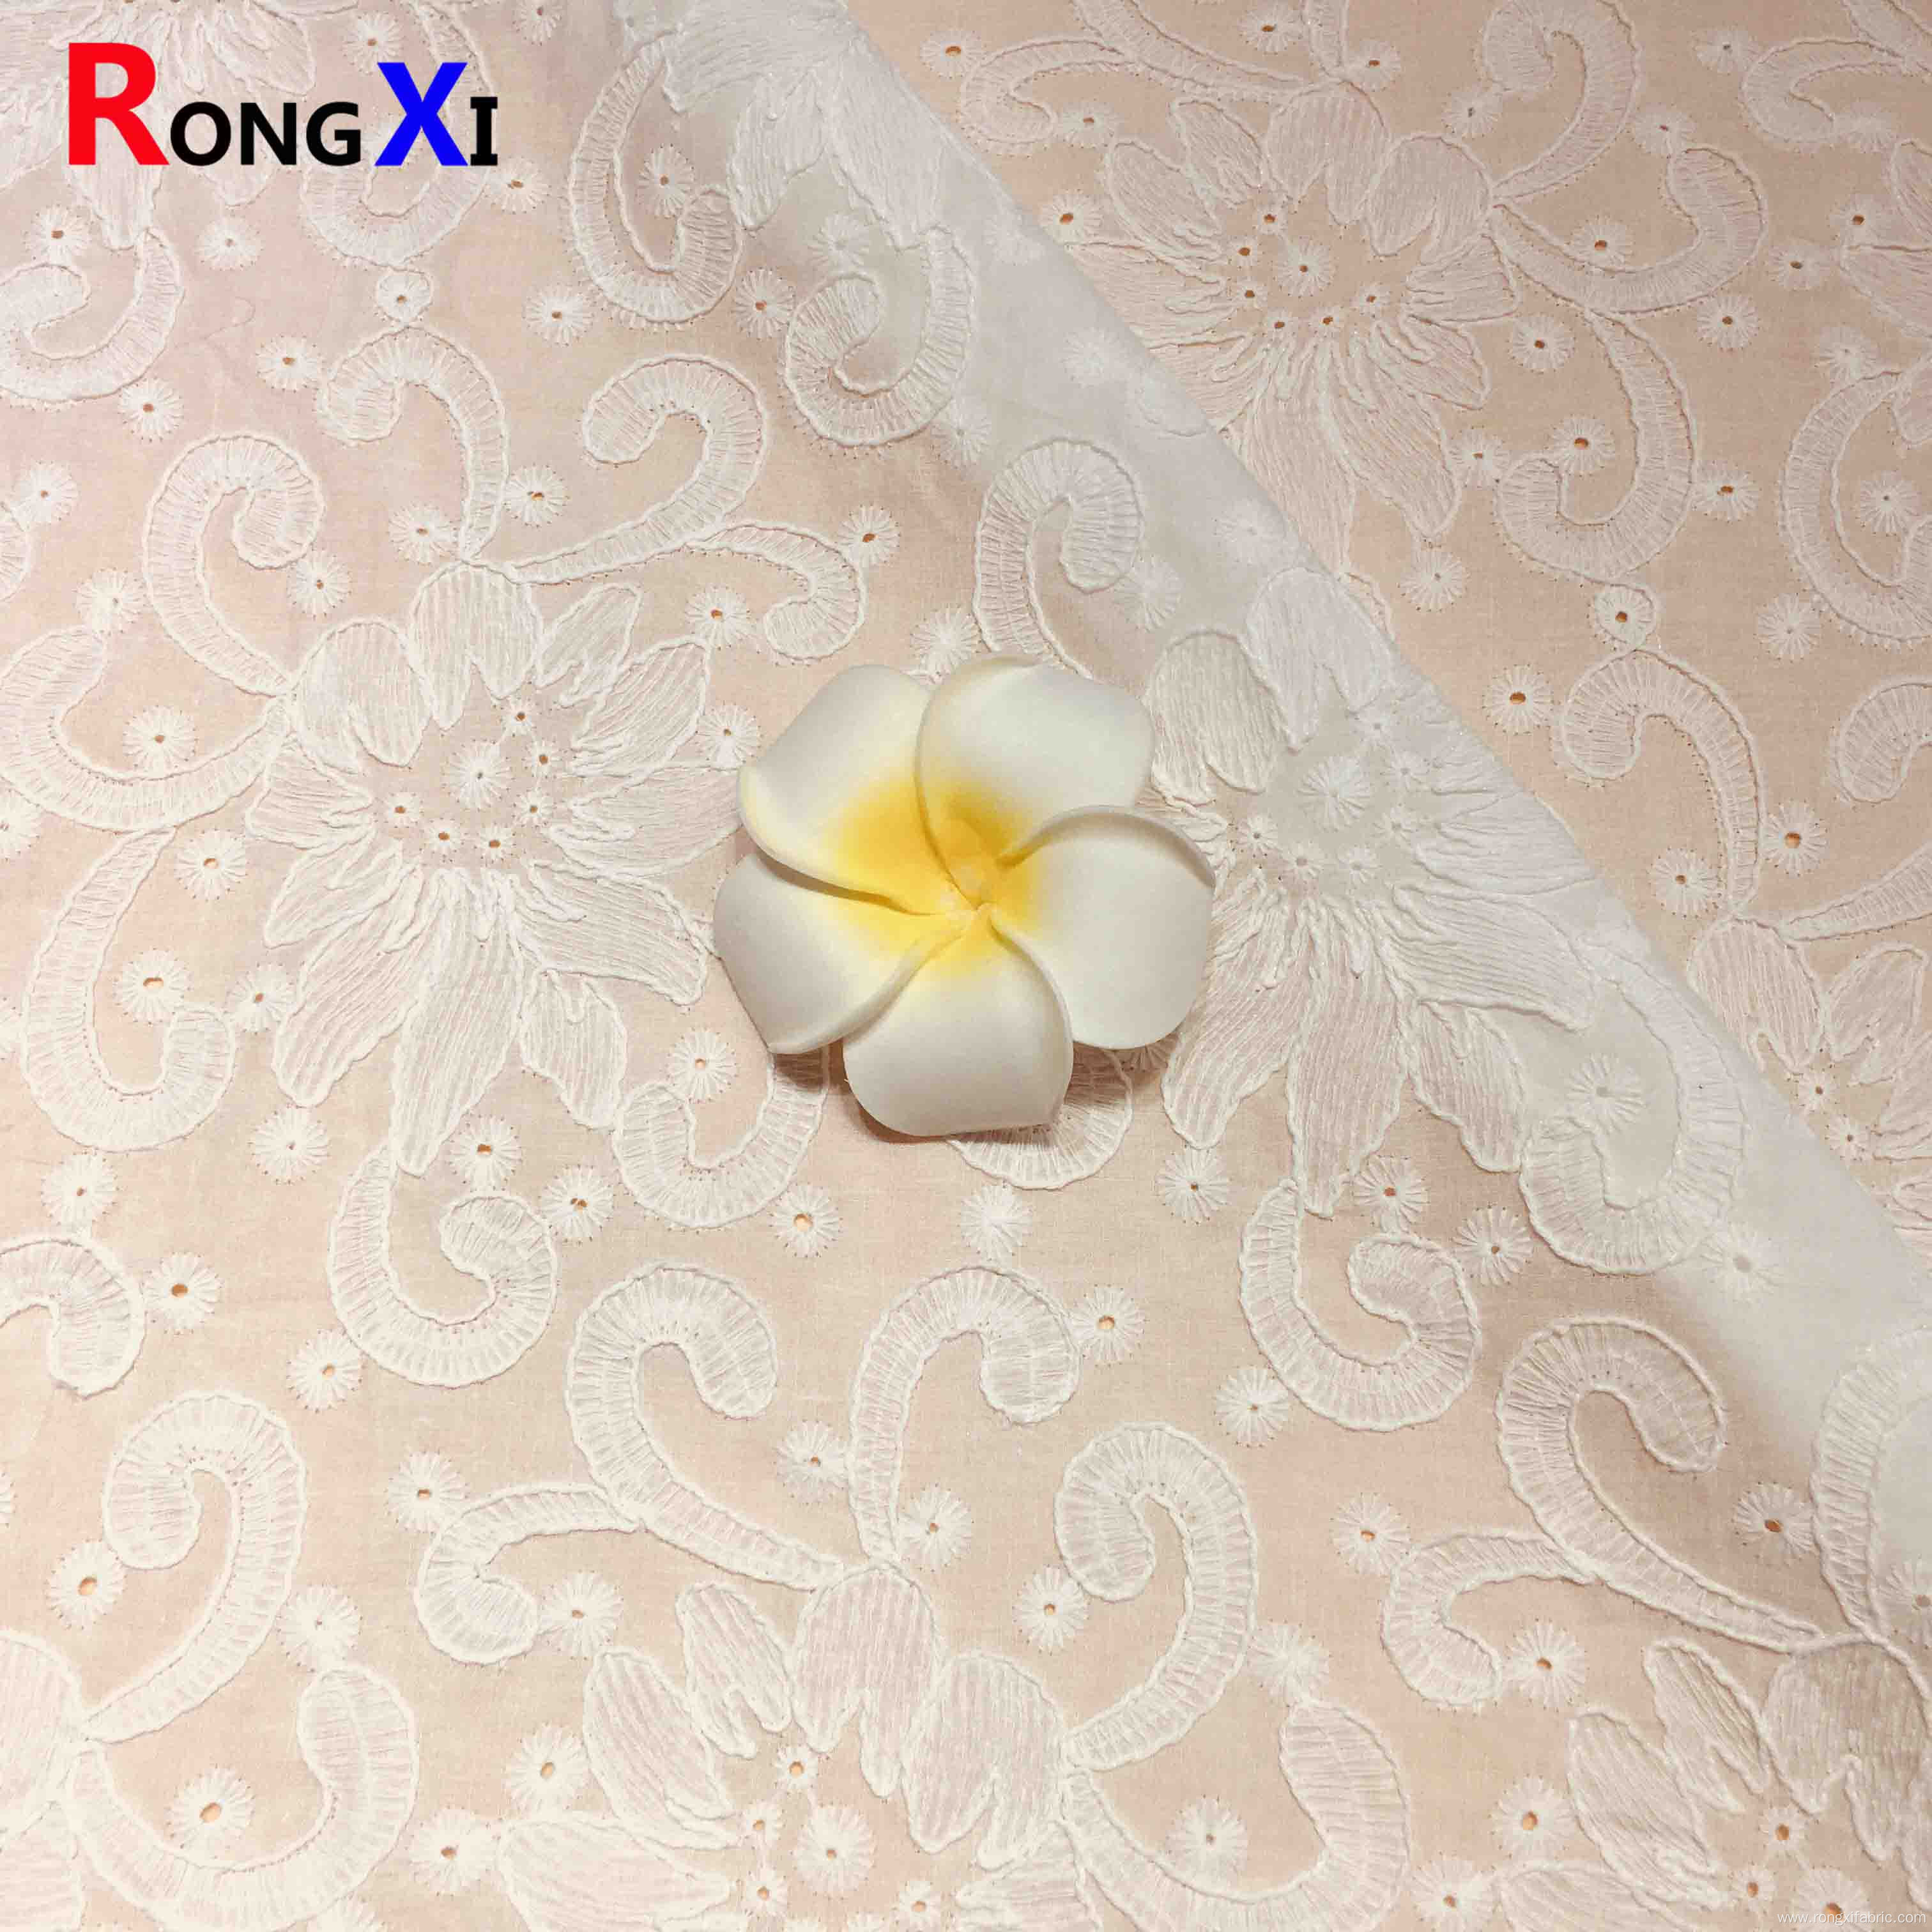 Cotton Eyelet Fabric Embroidered Fabric with Fishing Line